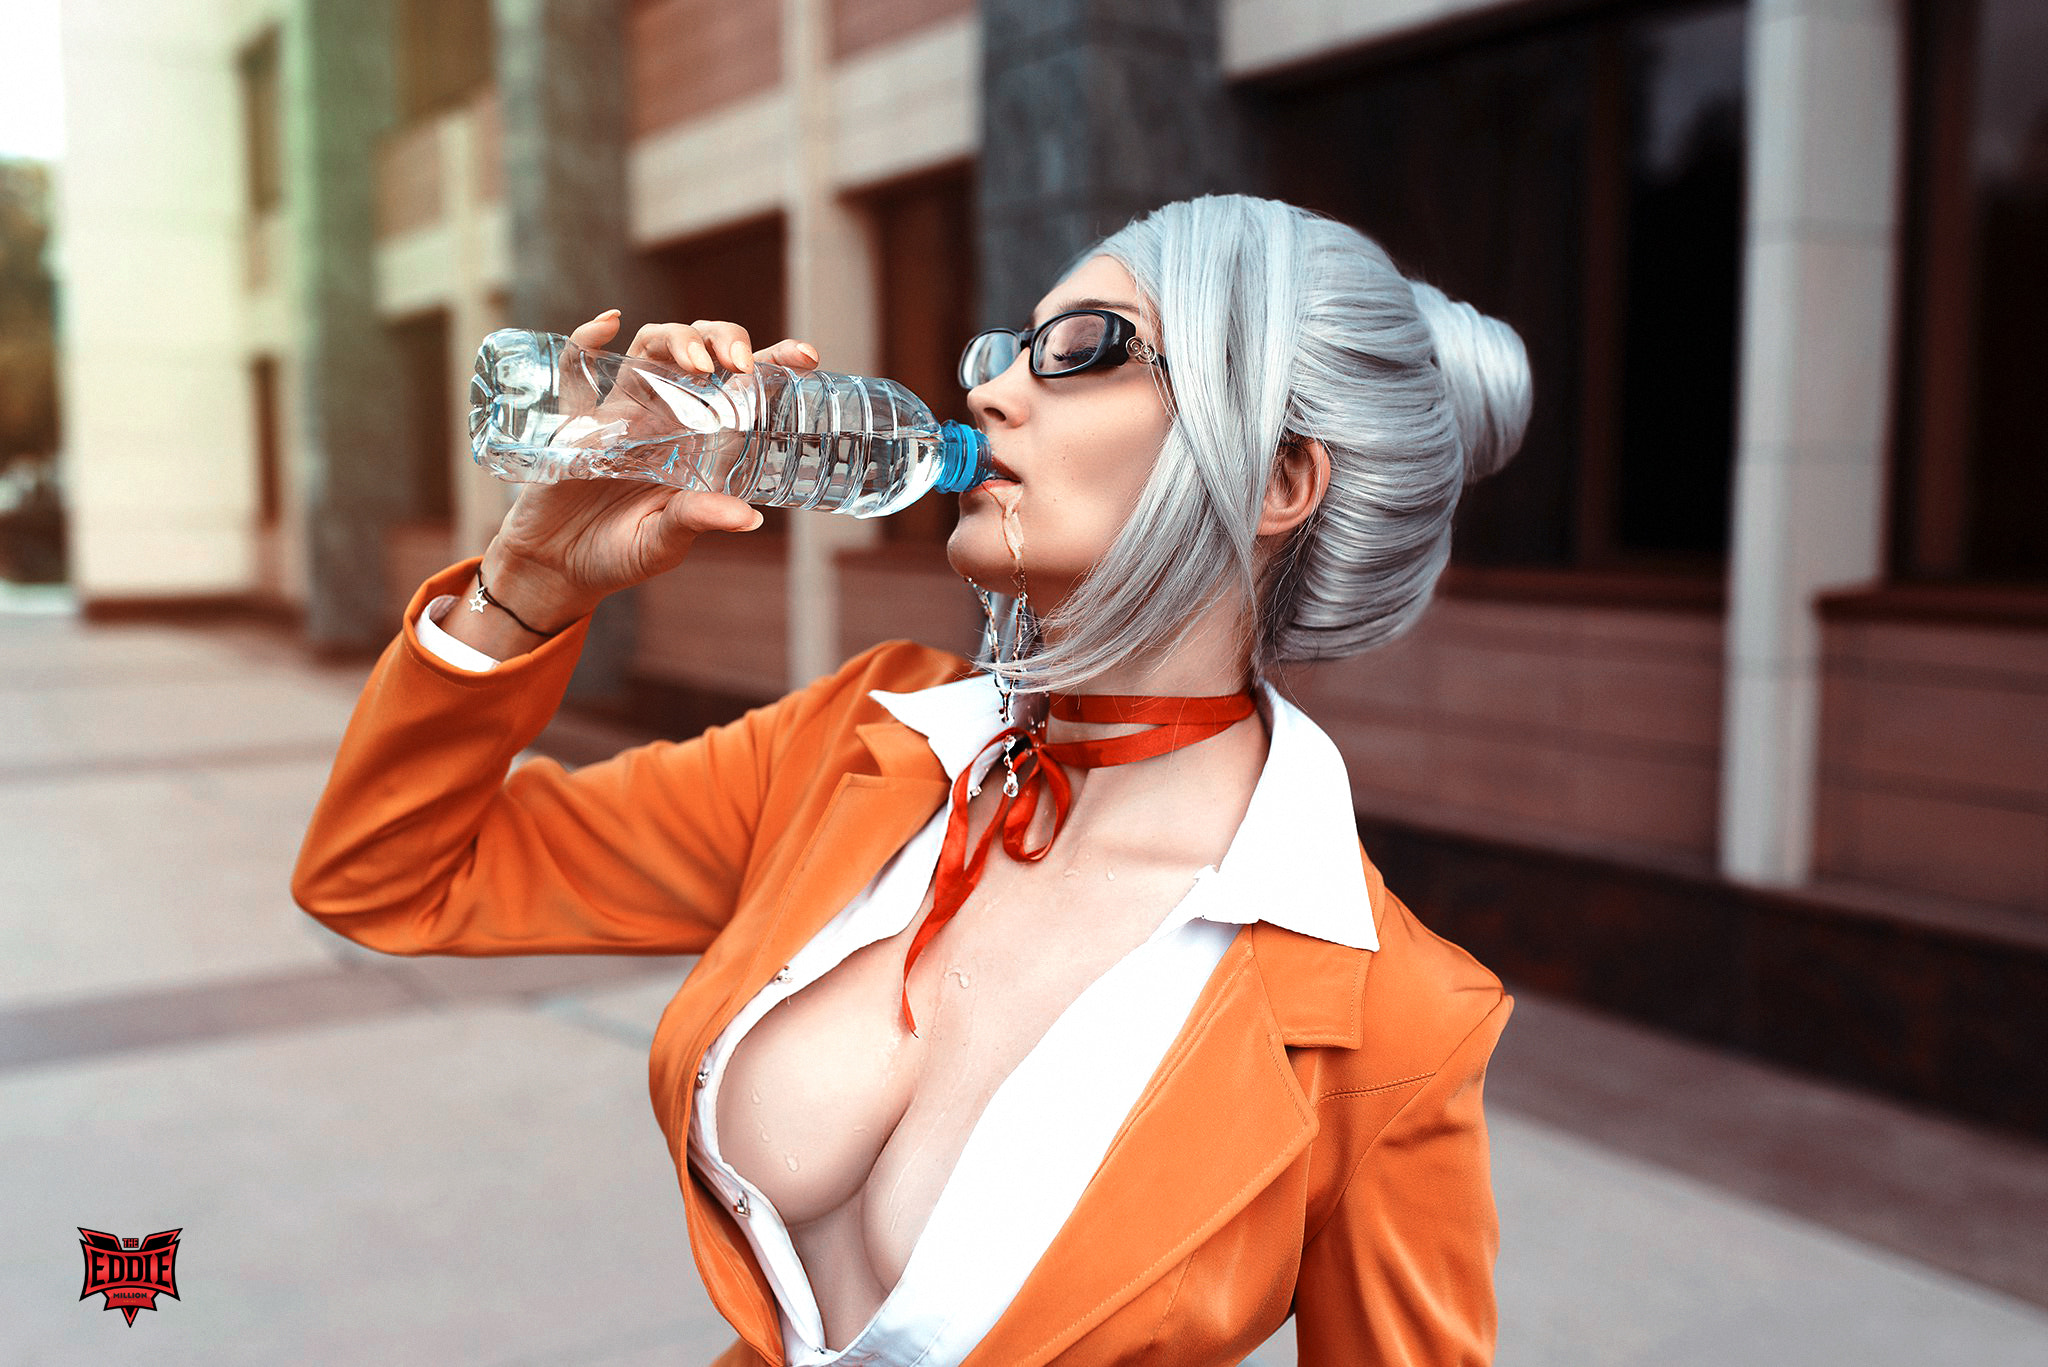 People 2048x1367 women portrait water boobs water drops bottles closed eyes women with glasses cosplay Shiraki Meiko Prison School model open clothes cleavage wet body glasses drinking problems